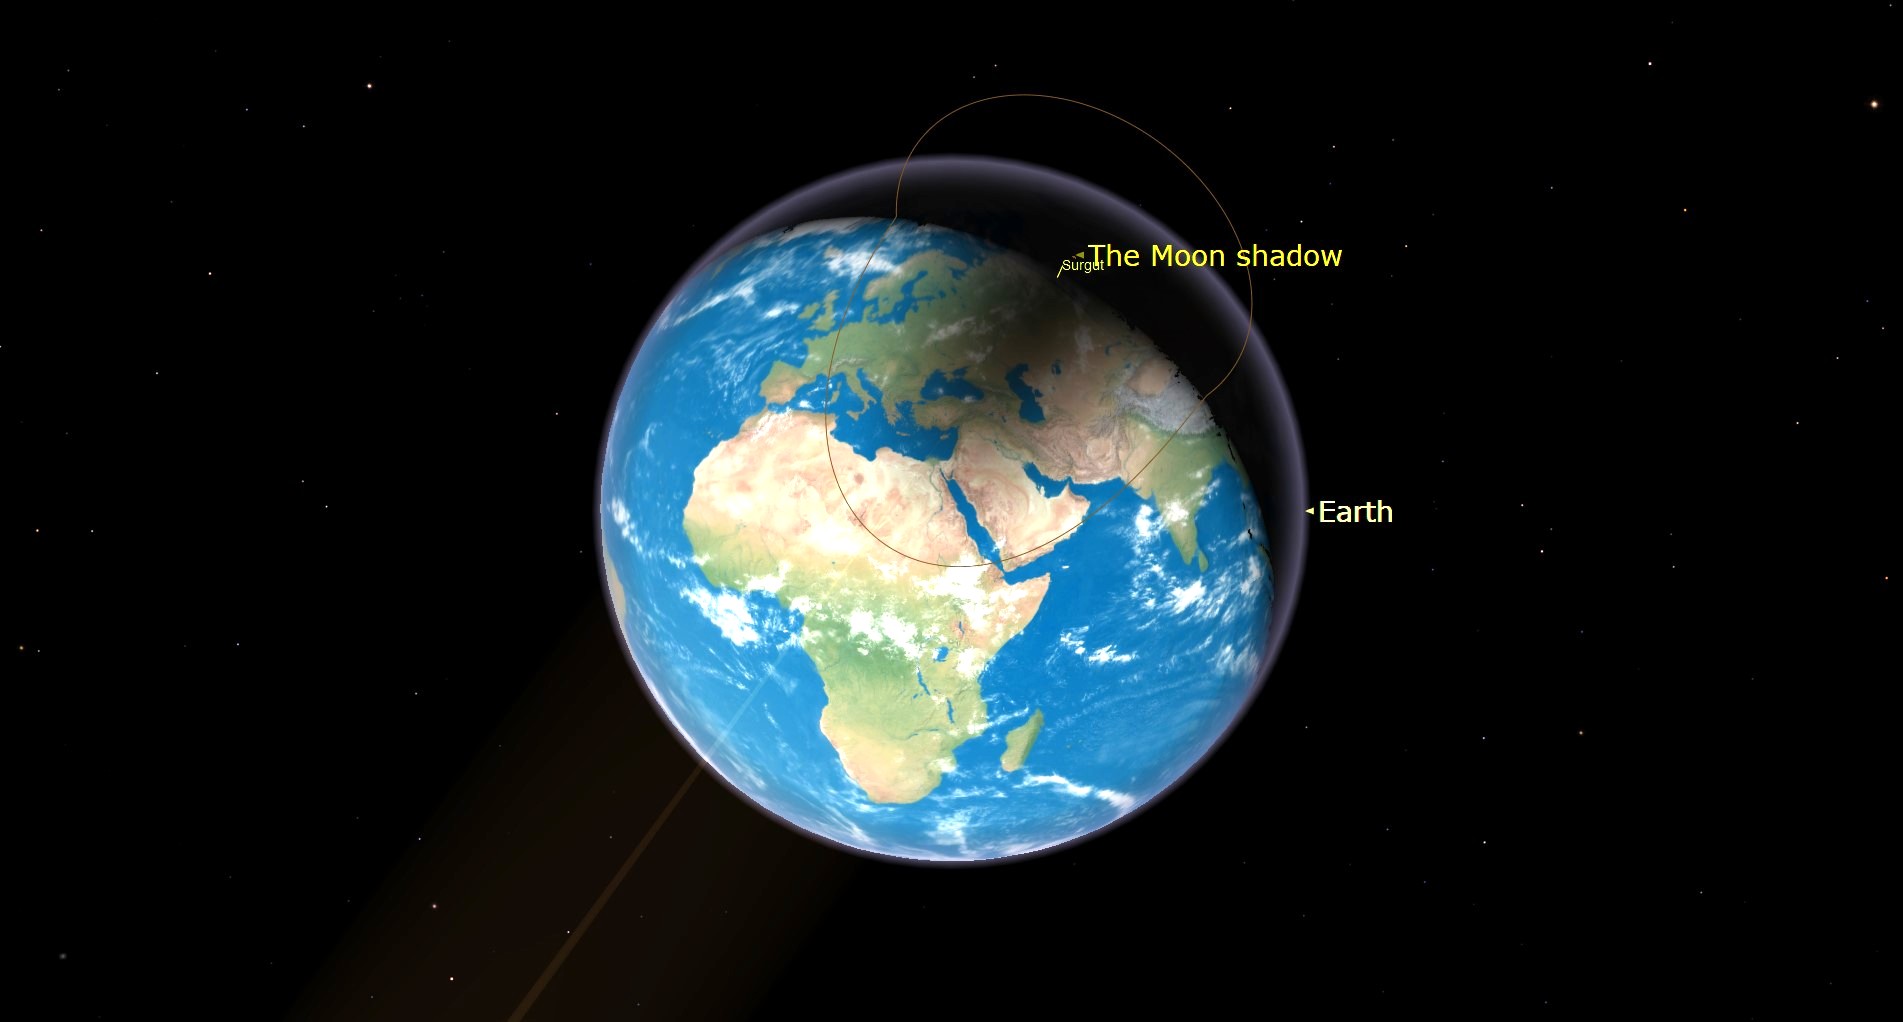 Graphic showing the moon's shadow across a portion of the Earth during the partial solar eclipse.